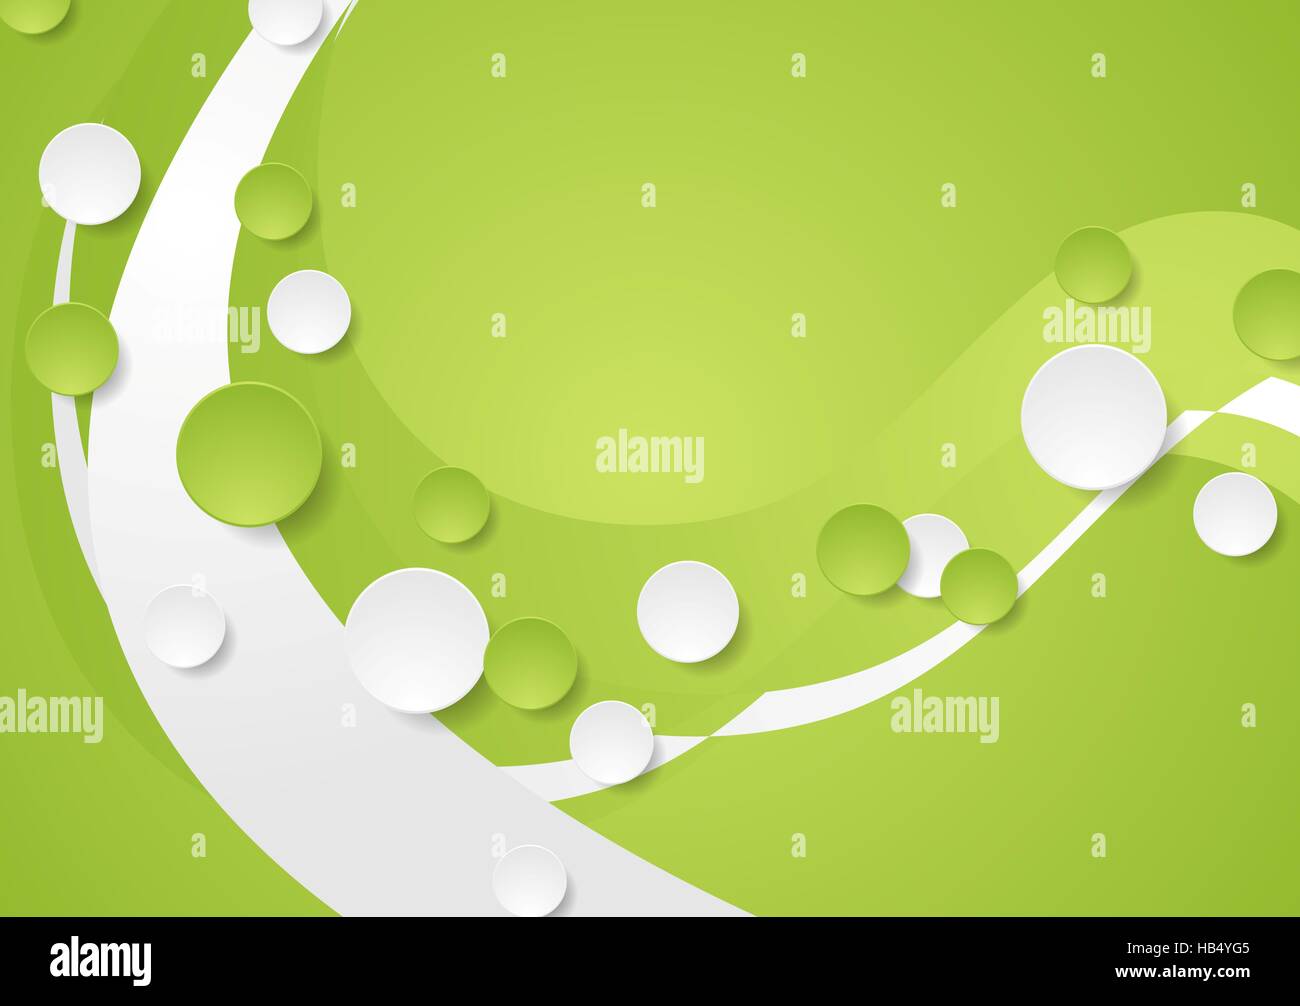 Bright green wavy tech abstract background Stock Photo